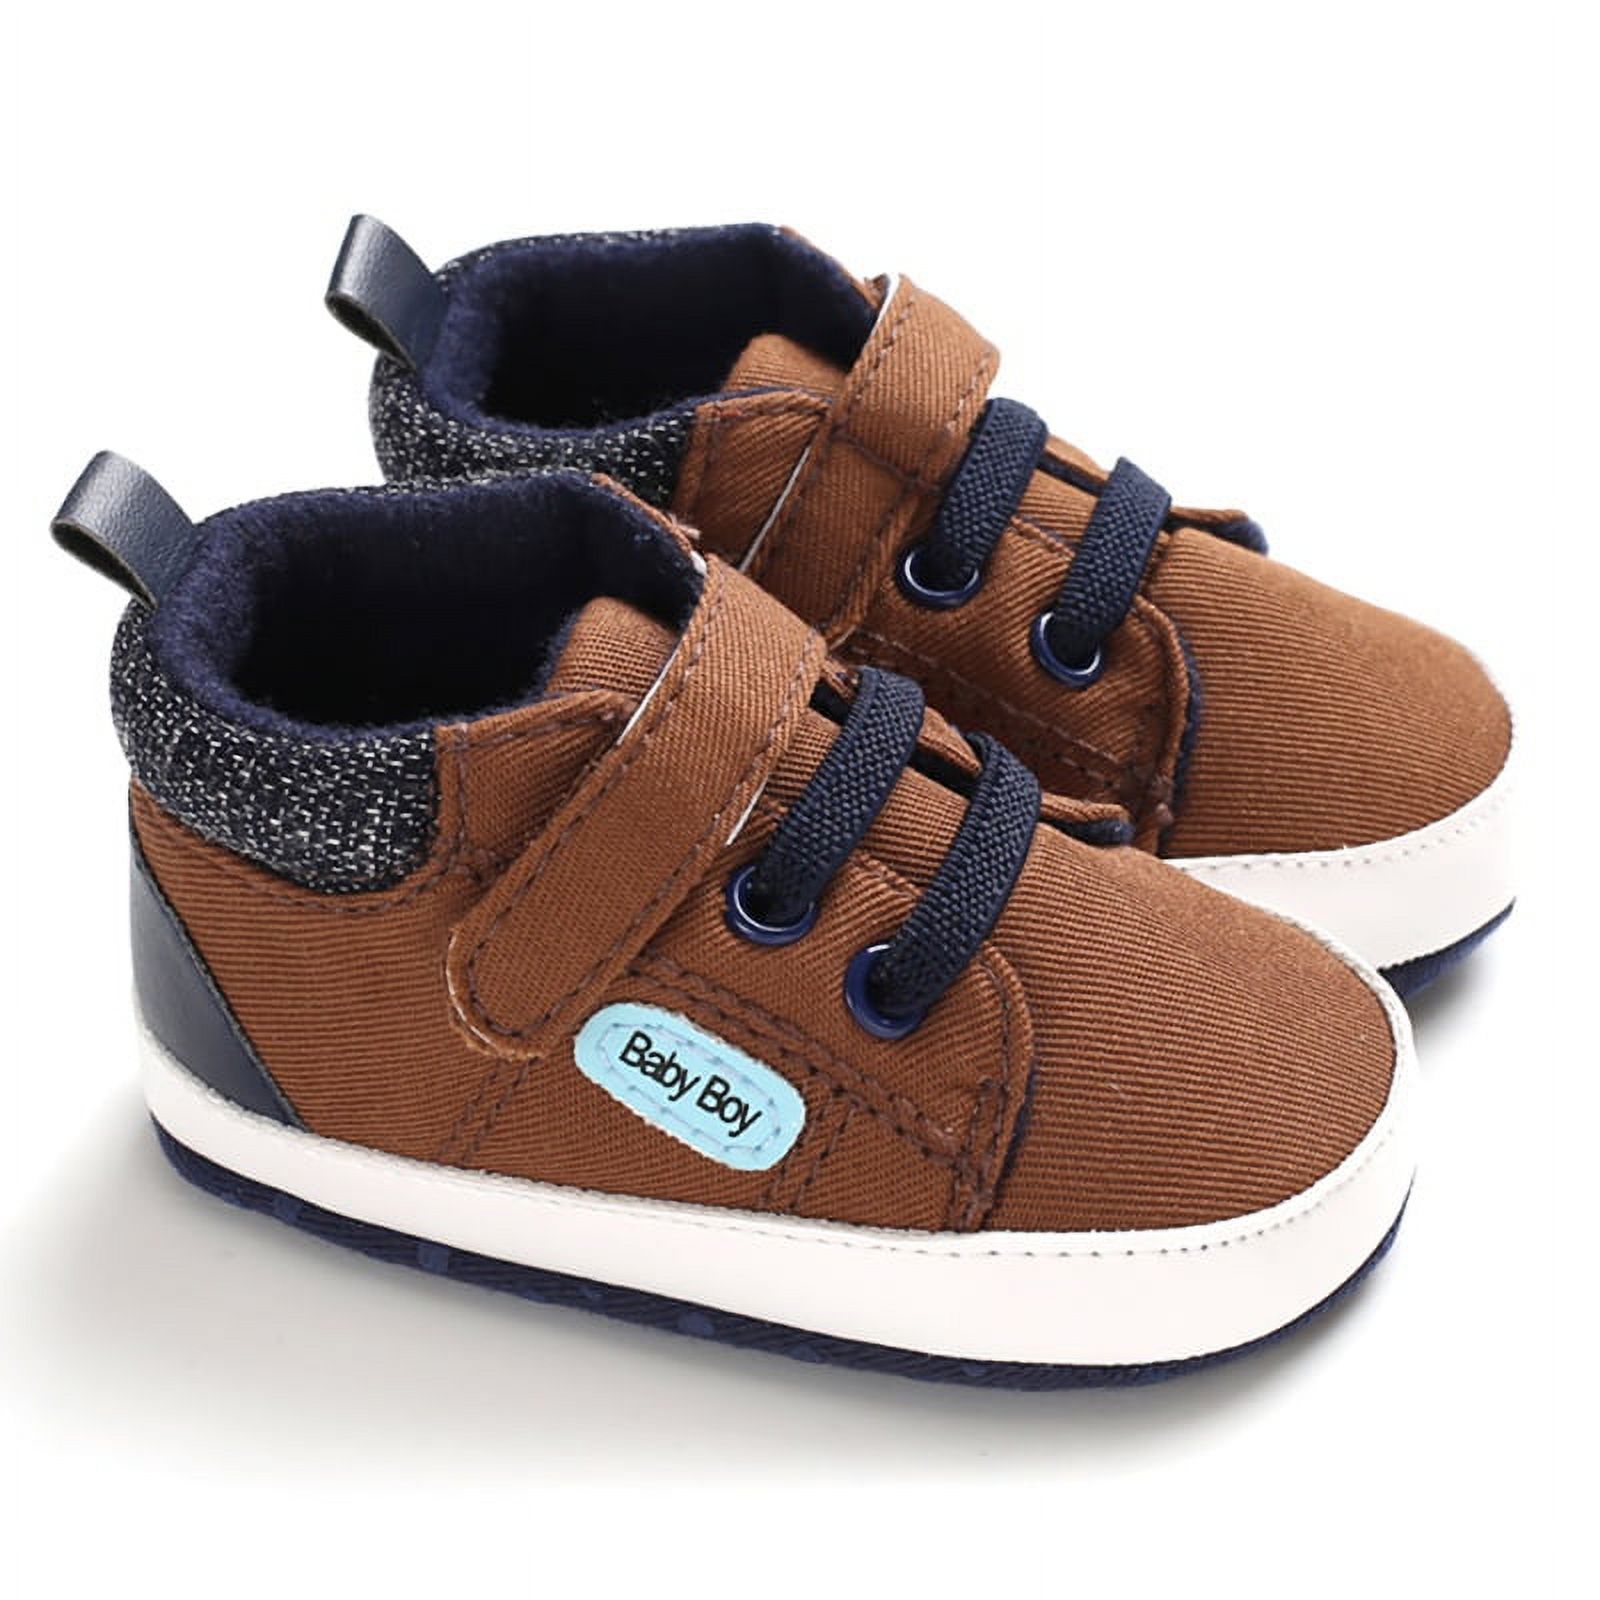 Infant Baby Boys Girls Canvas Toddler Sneakers Rubber Sole Non-Slip Candy Shoes First Walkers Prewalker Crib Shoes - image 2 of 8